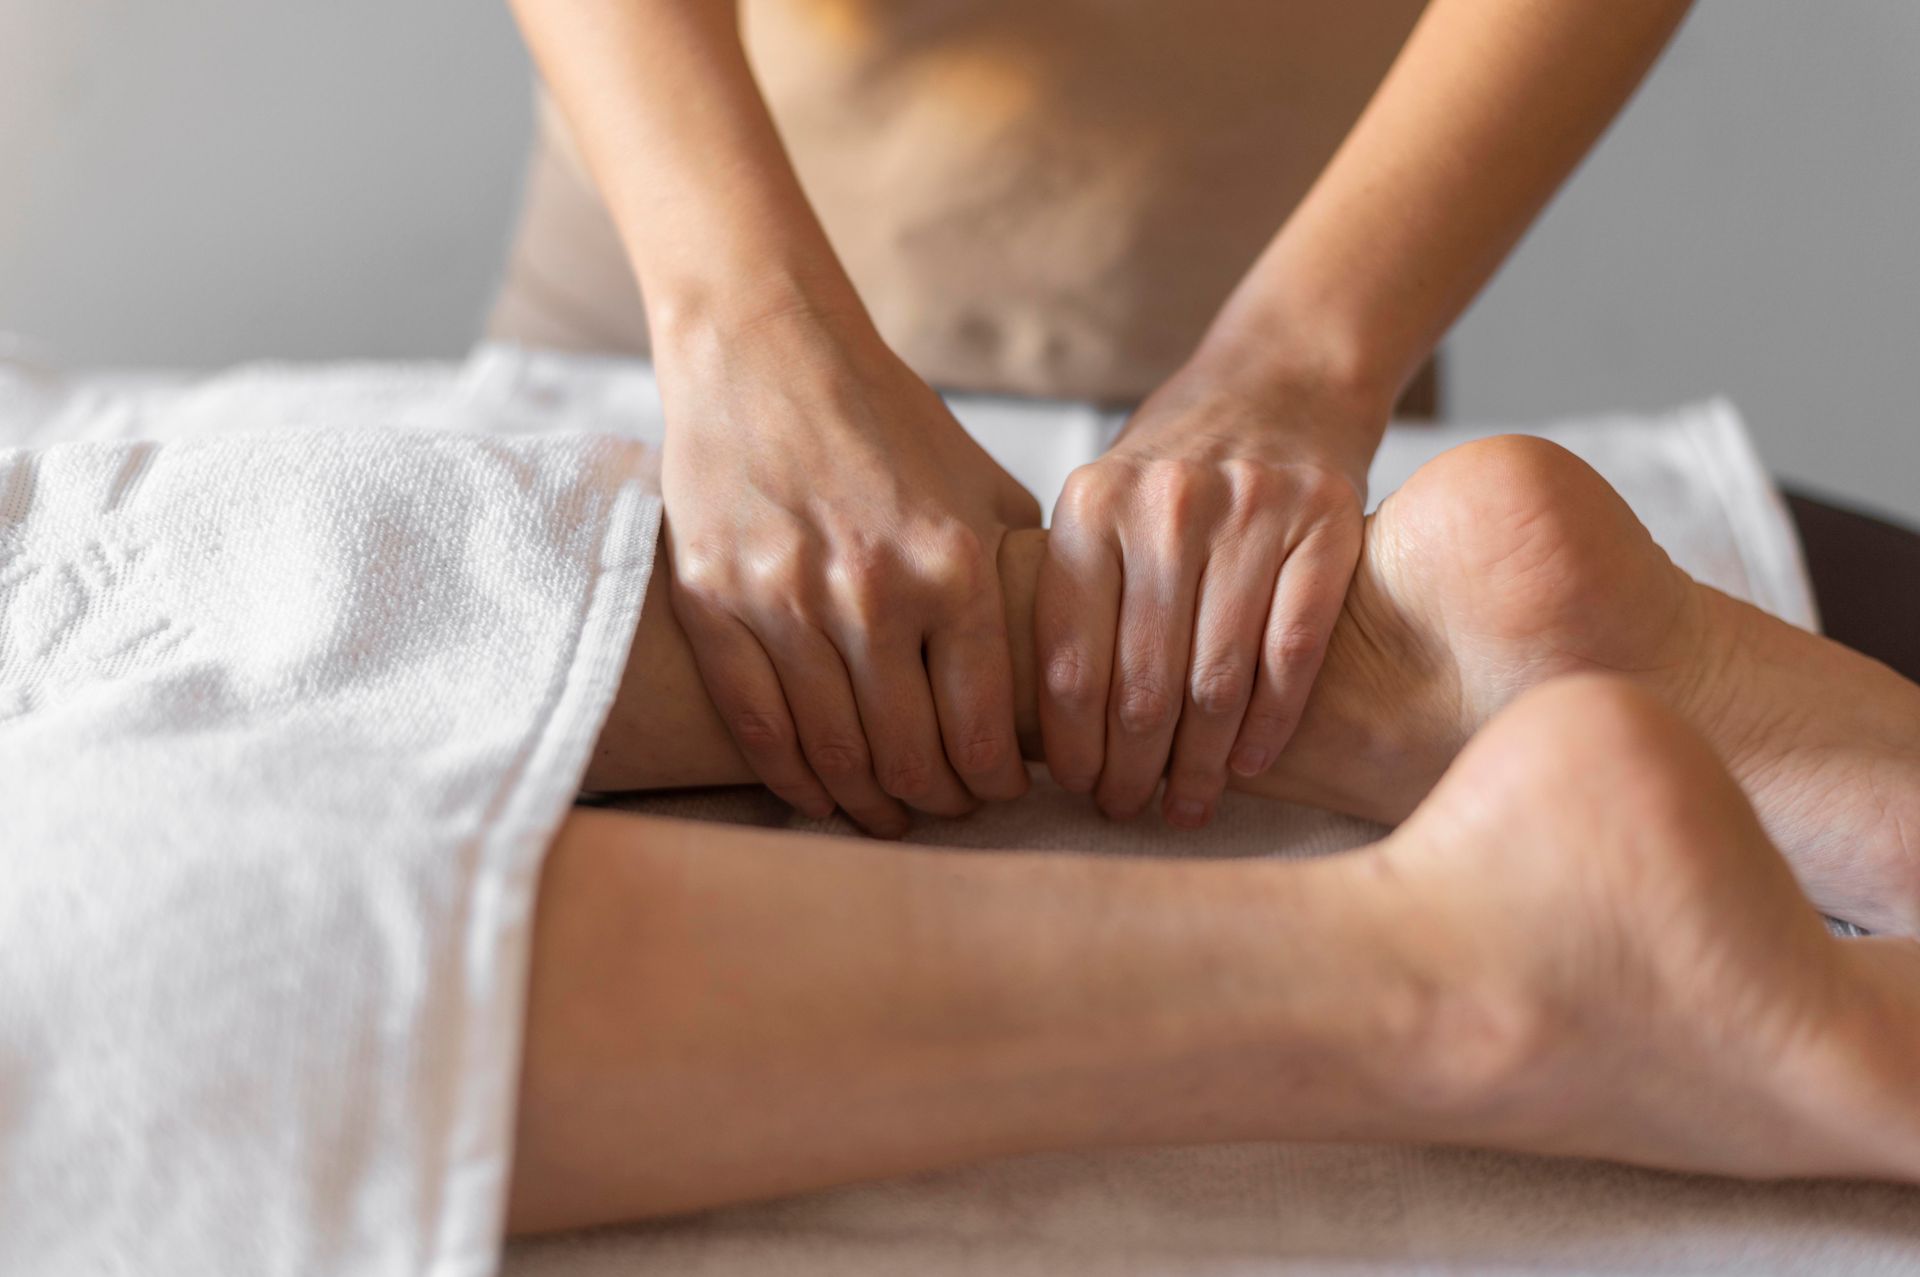 A woman is getting a massage on her leg in a spa.